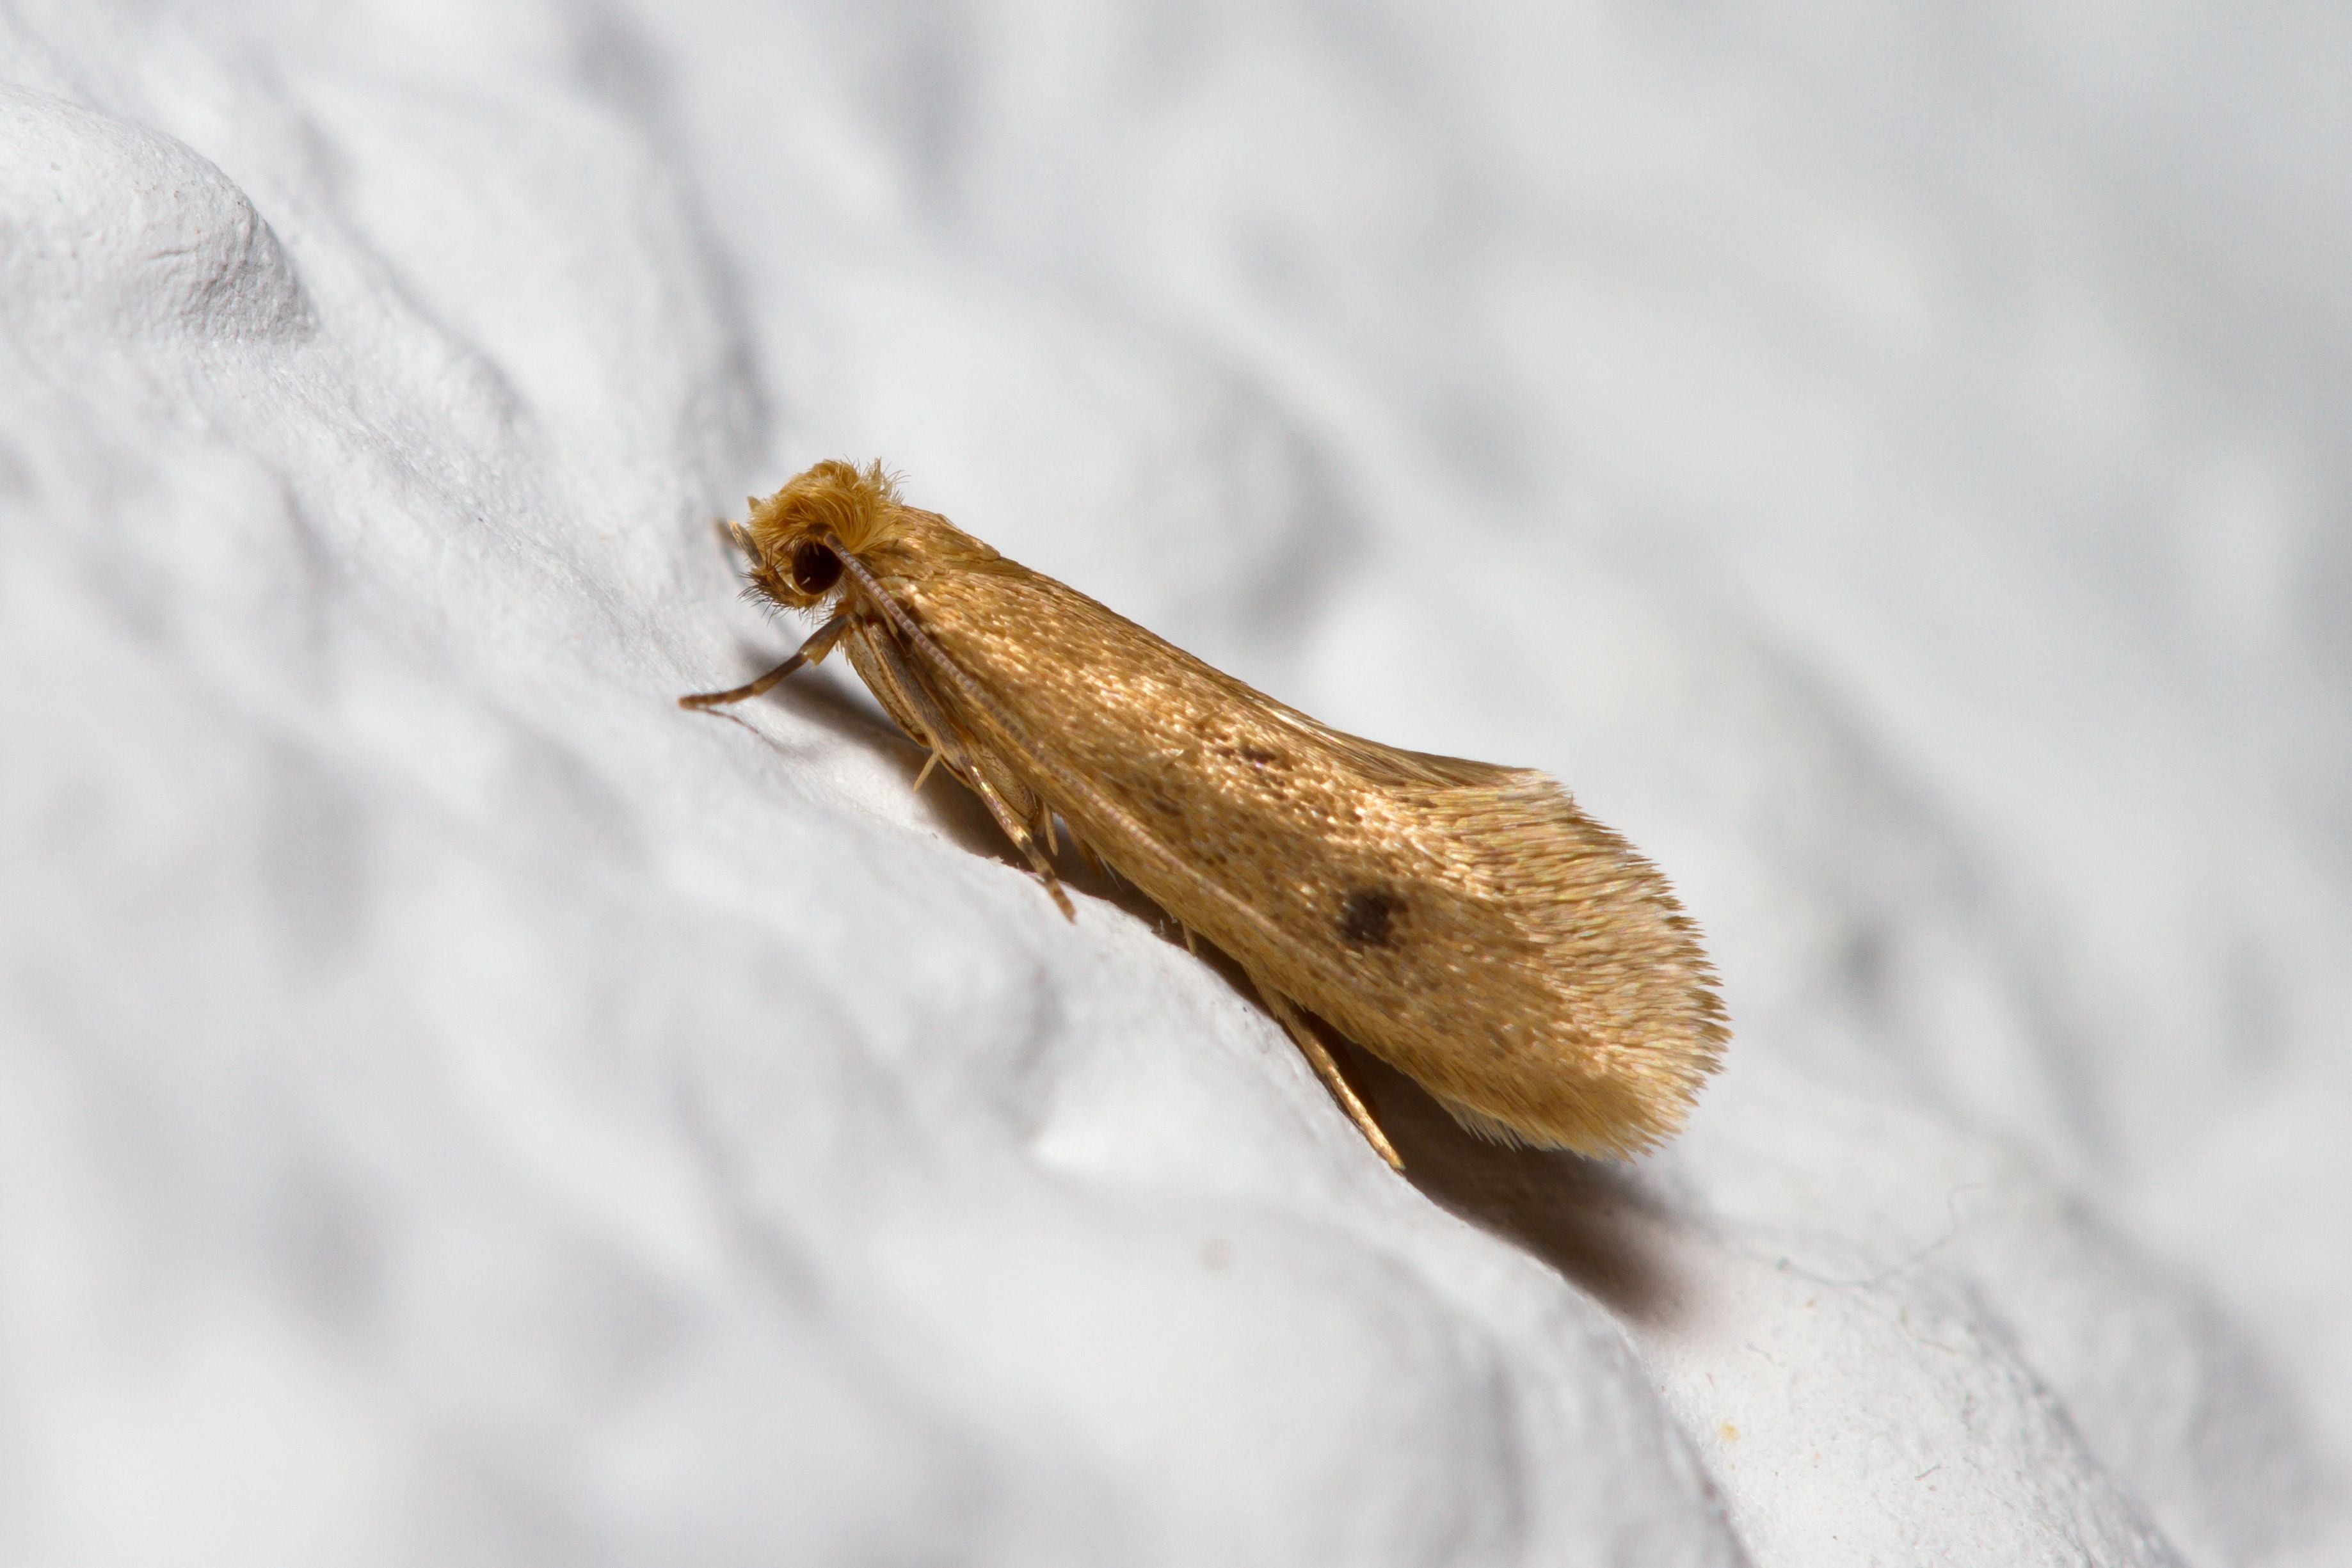 Stop clothes moths in their tracks